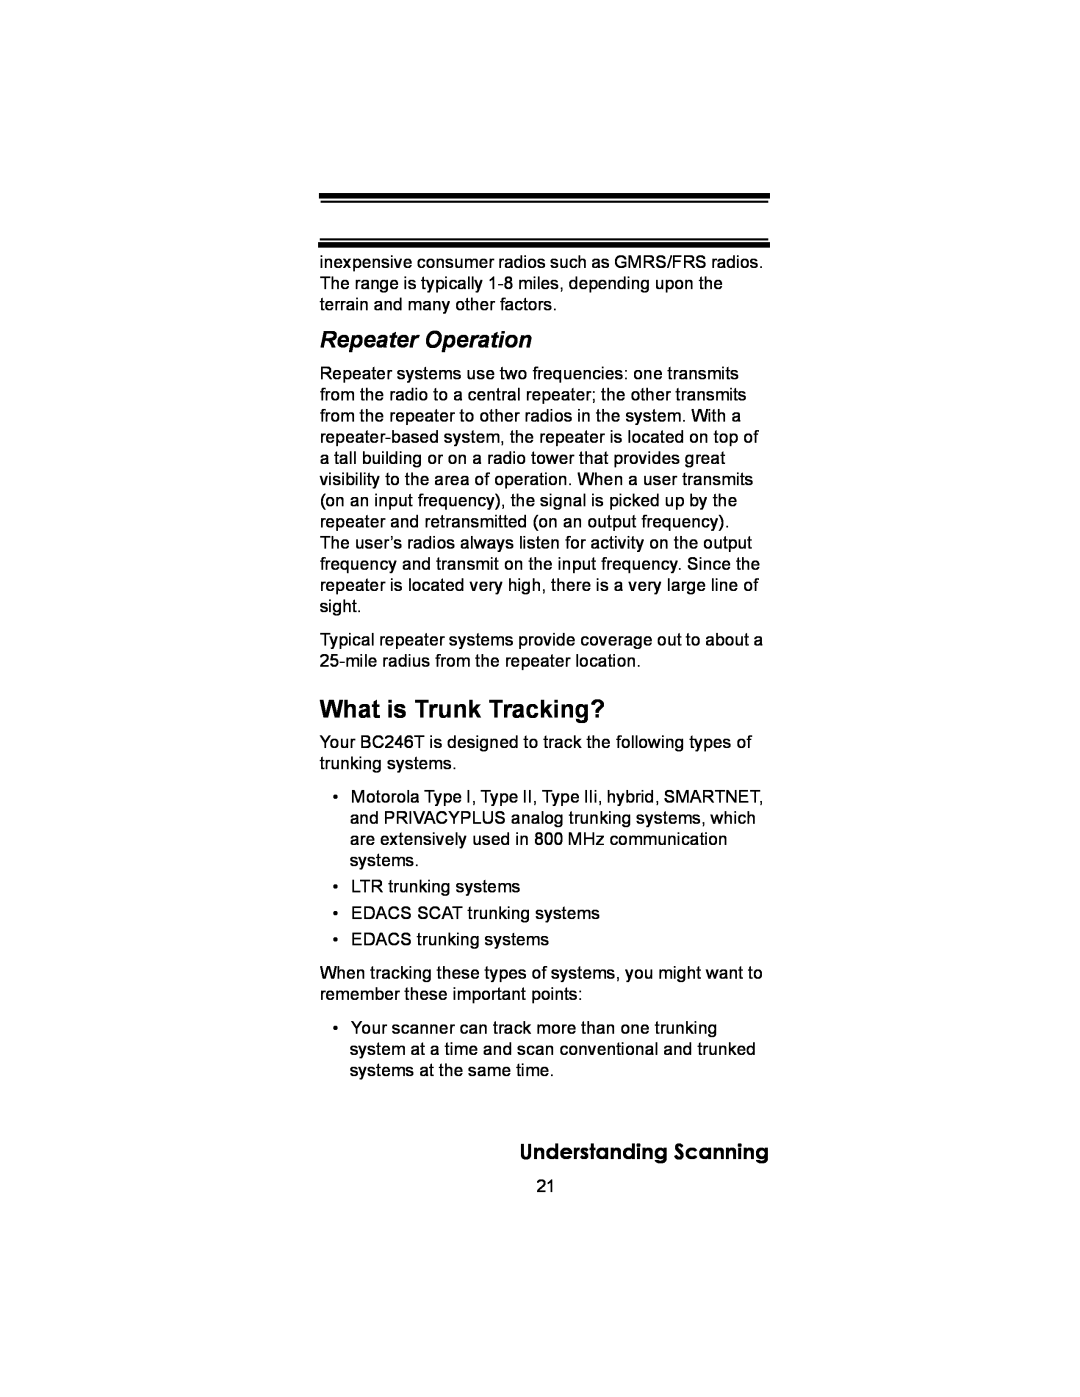 Uniden BC246T owner manual What is Trunk Tracking?, Repeater Operation, Understanding Scanning 